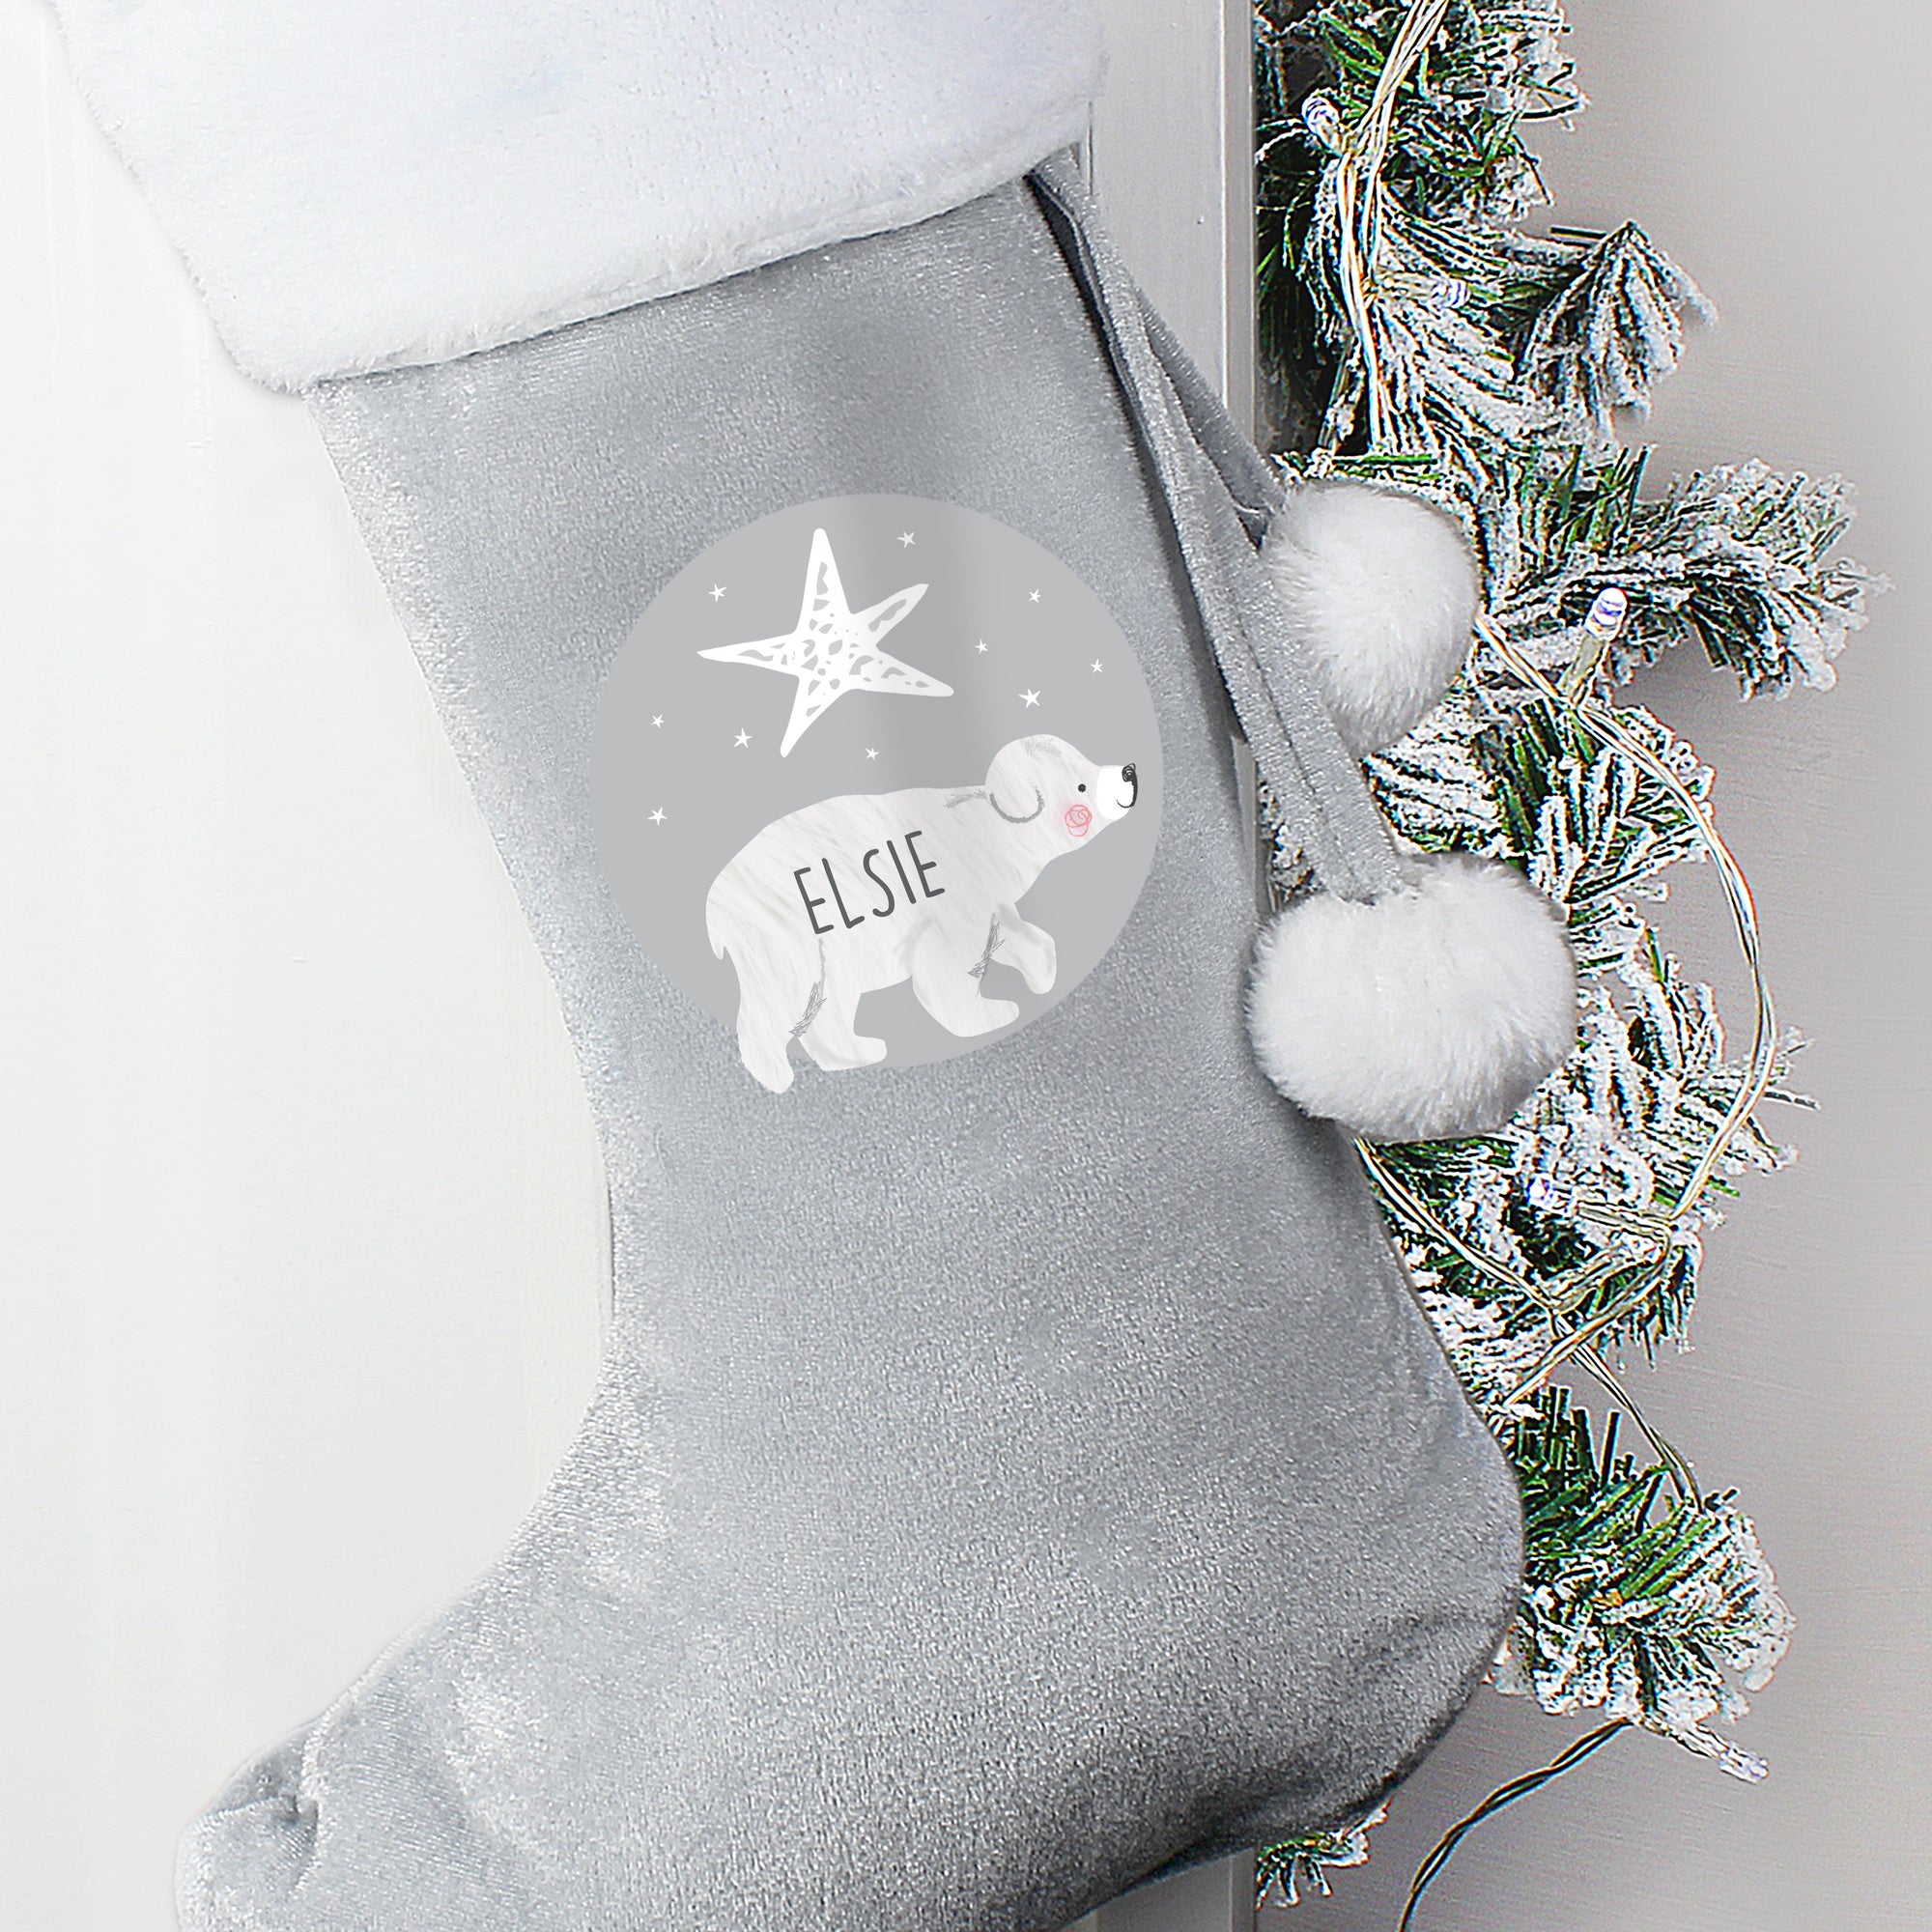 Personalised grey velvet Christmas stocking with a plush white trim. The front of the stocking features an illustration of a hand-drawn baby polar bear with a star above it and the stocking can be personalised with a name of your choice which will be printed in a black modern uppercase font inside the image of the bear.